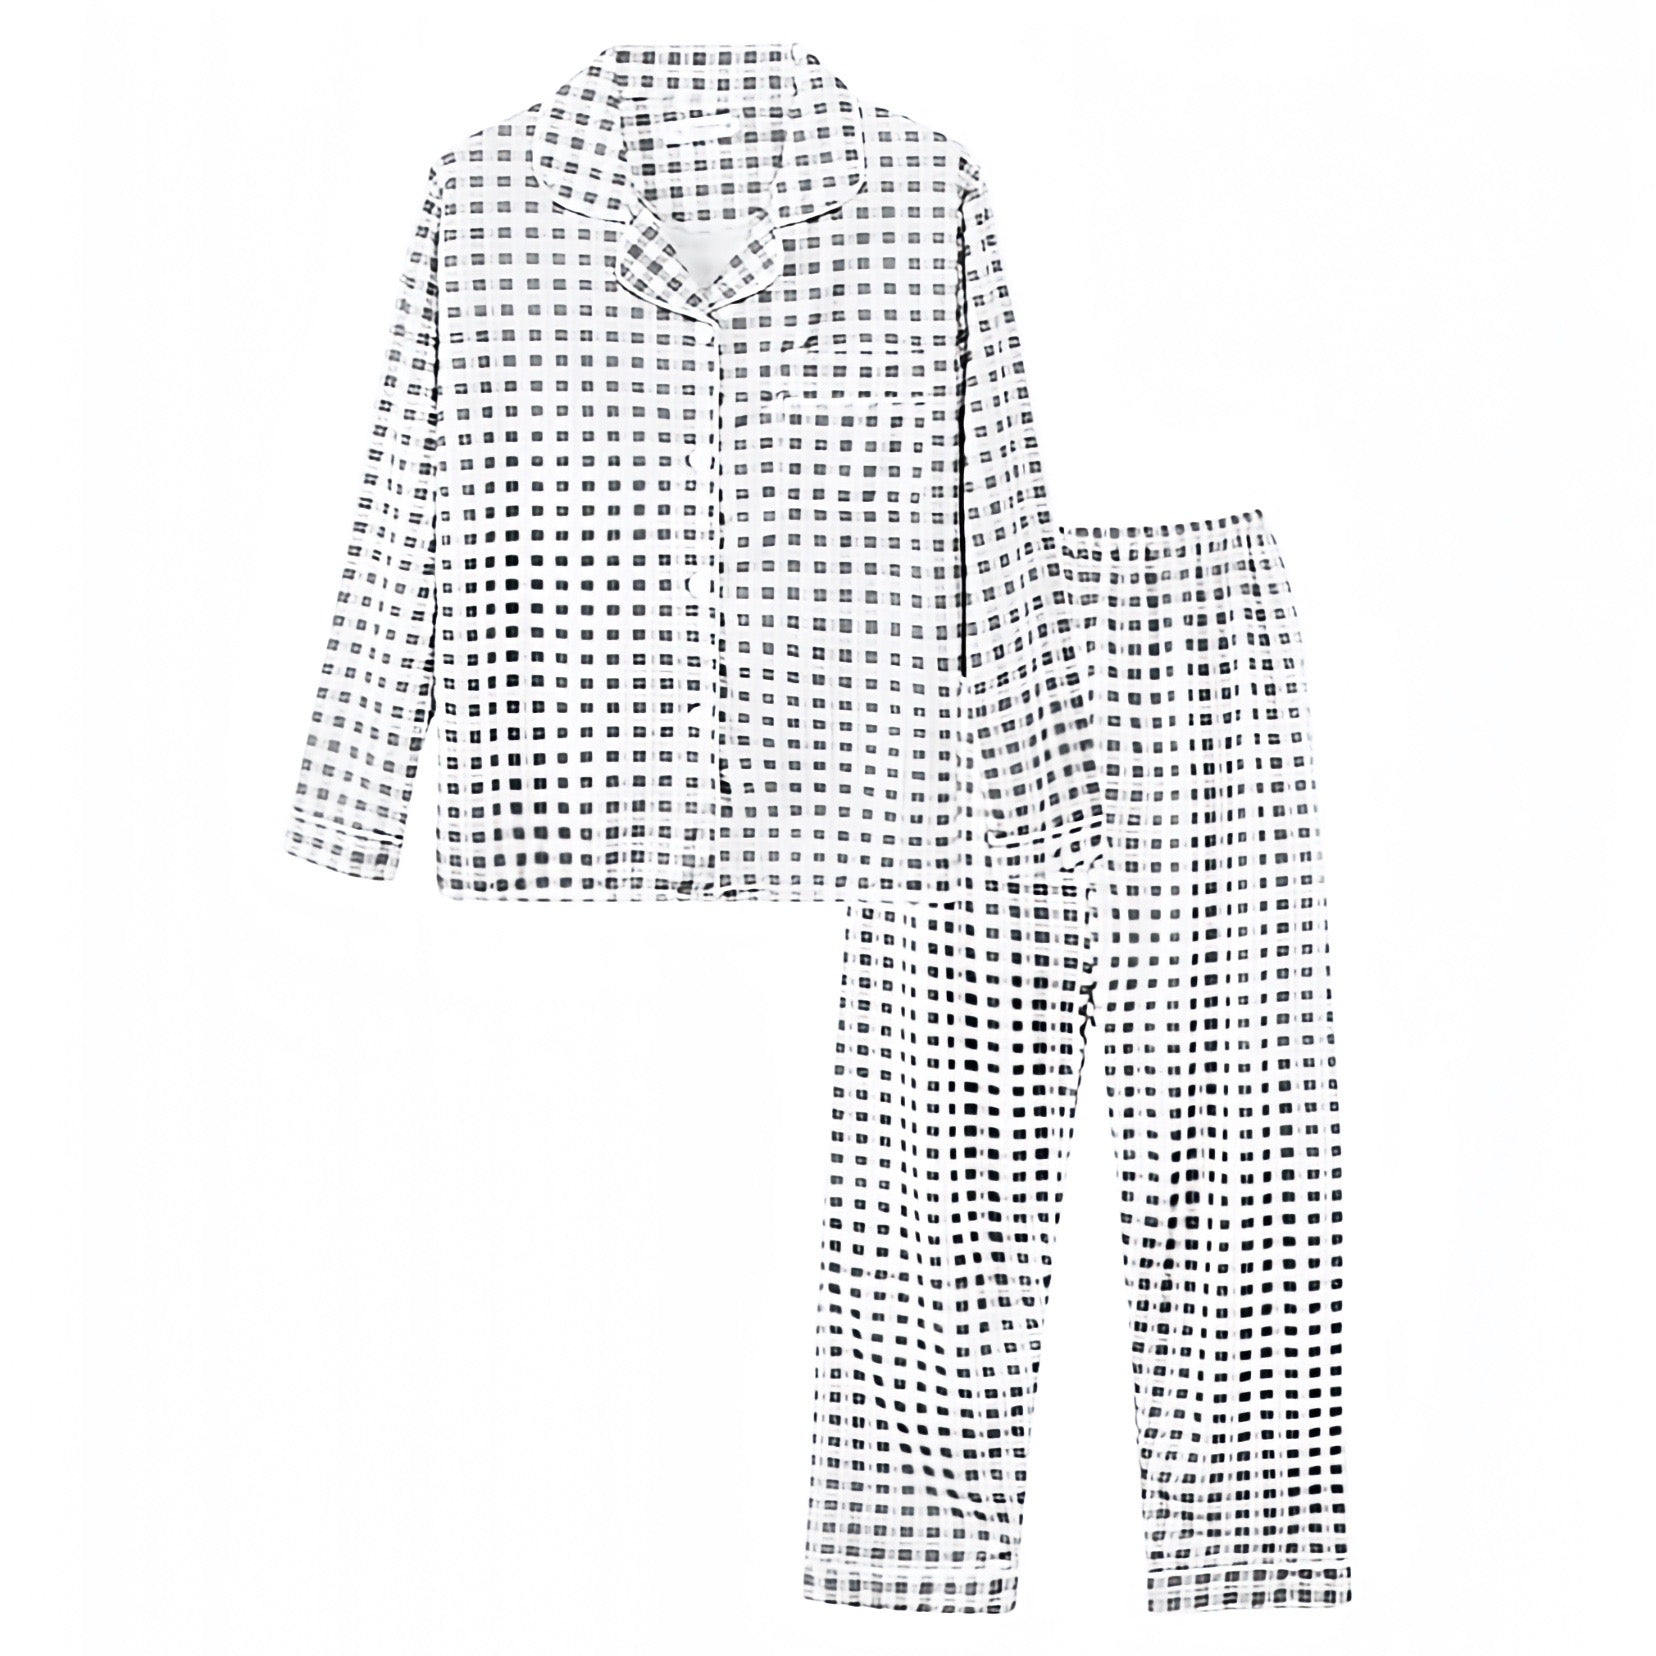 light-grey-gray-and-white-gingham-checkered-plaid-patterned-cotton-linen-v-neck-button-down-long-sleeve-shirt-top-mid-low-rise-pants-bottoms-pajama-two-piece-set-pjs-cozy-comfy-lounge-wear-women-ladies-chic-trendy-spring-2024-summer-preppy-style-casual-feminine-european-vanilla-girl-classy-elegant-eber-jey-roller-rabbit-dupe